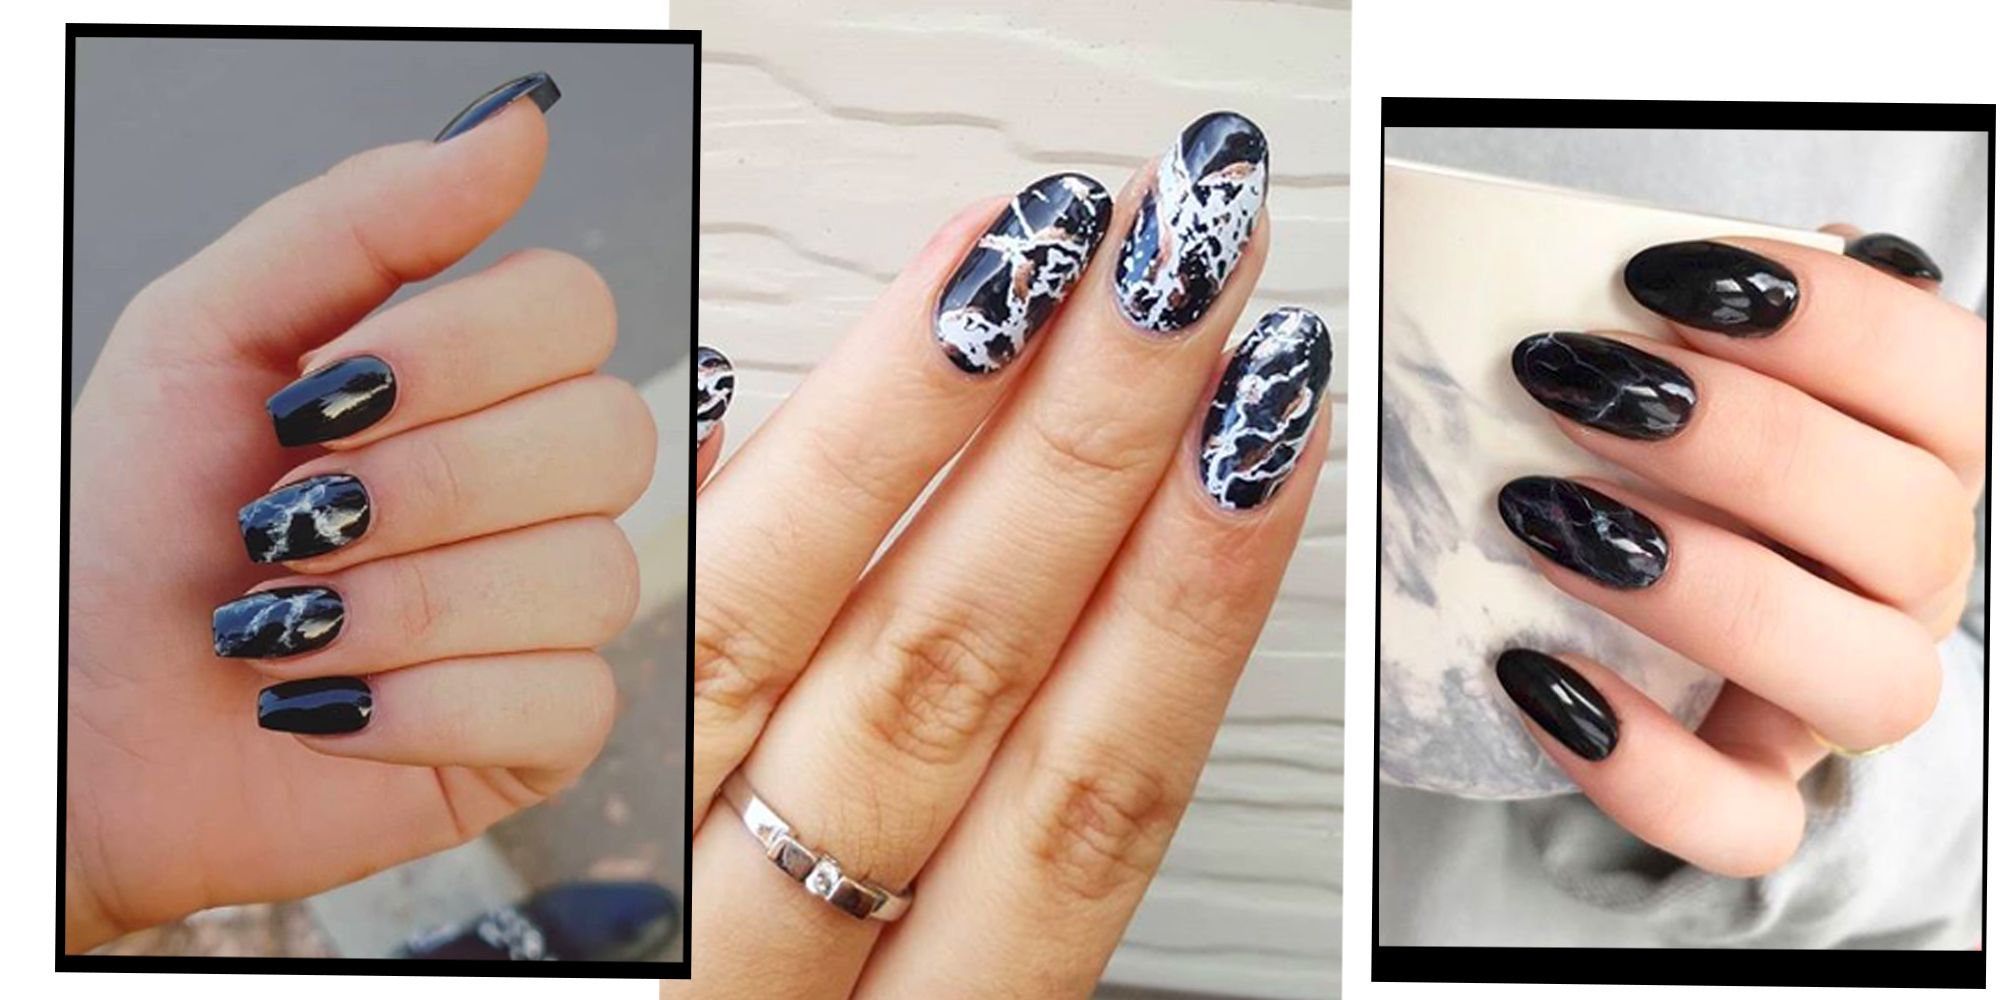 2. "Marble Nail Art Designs" - wide 9